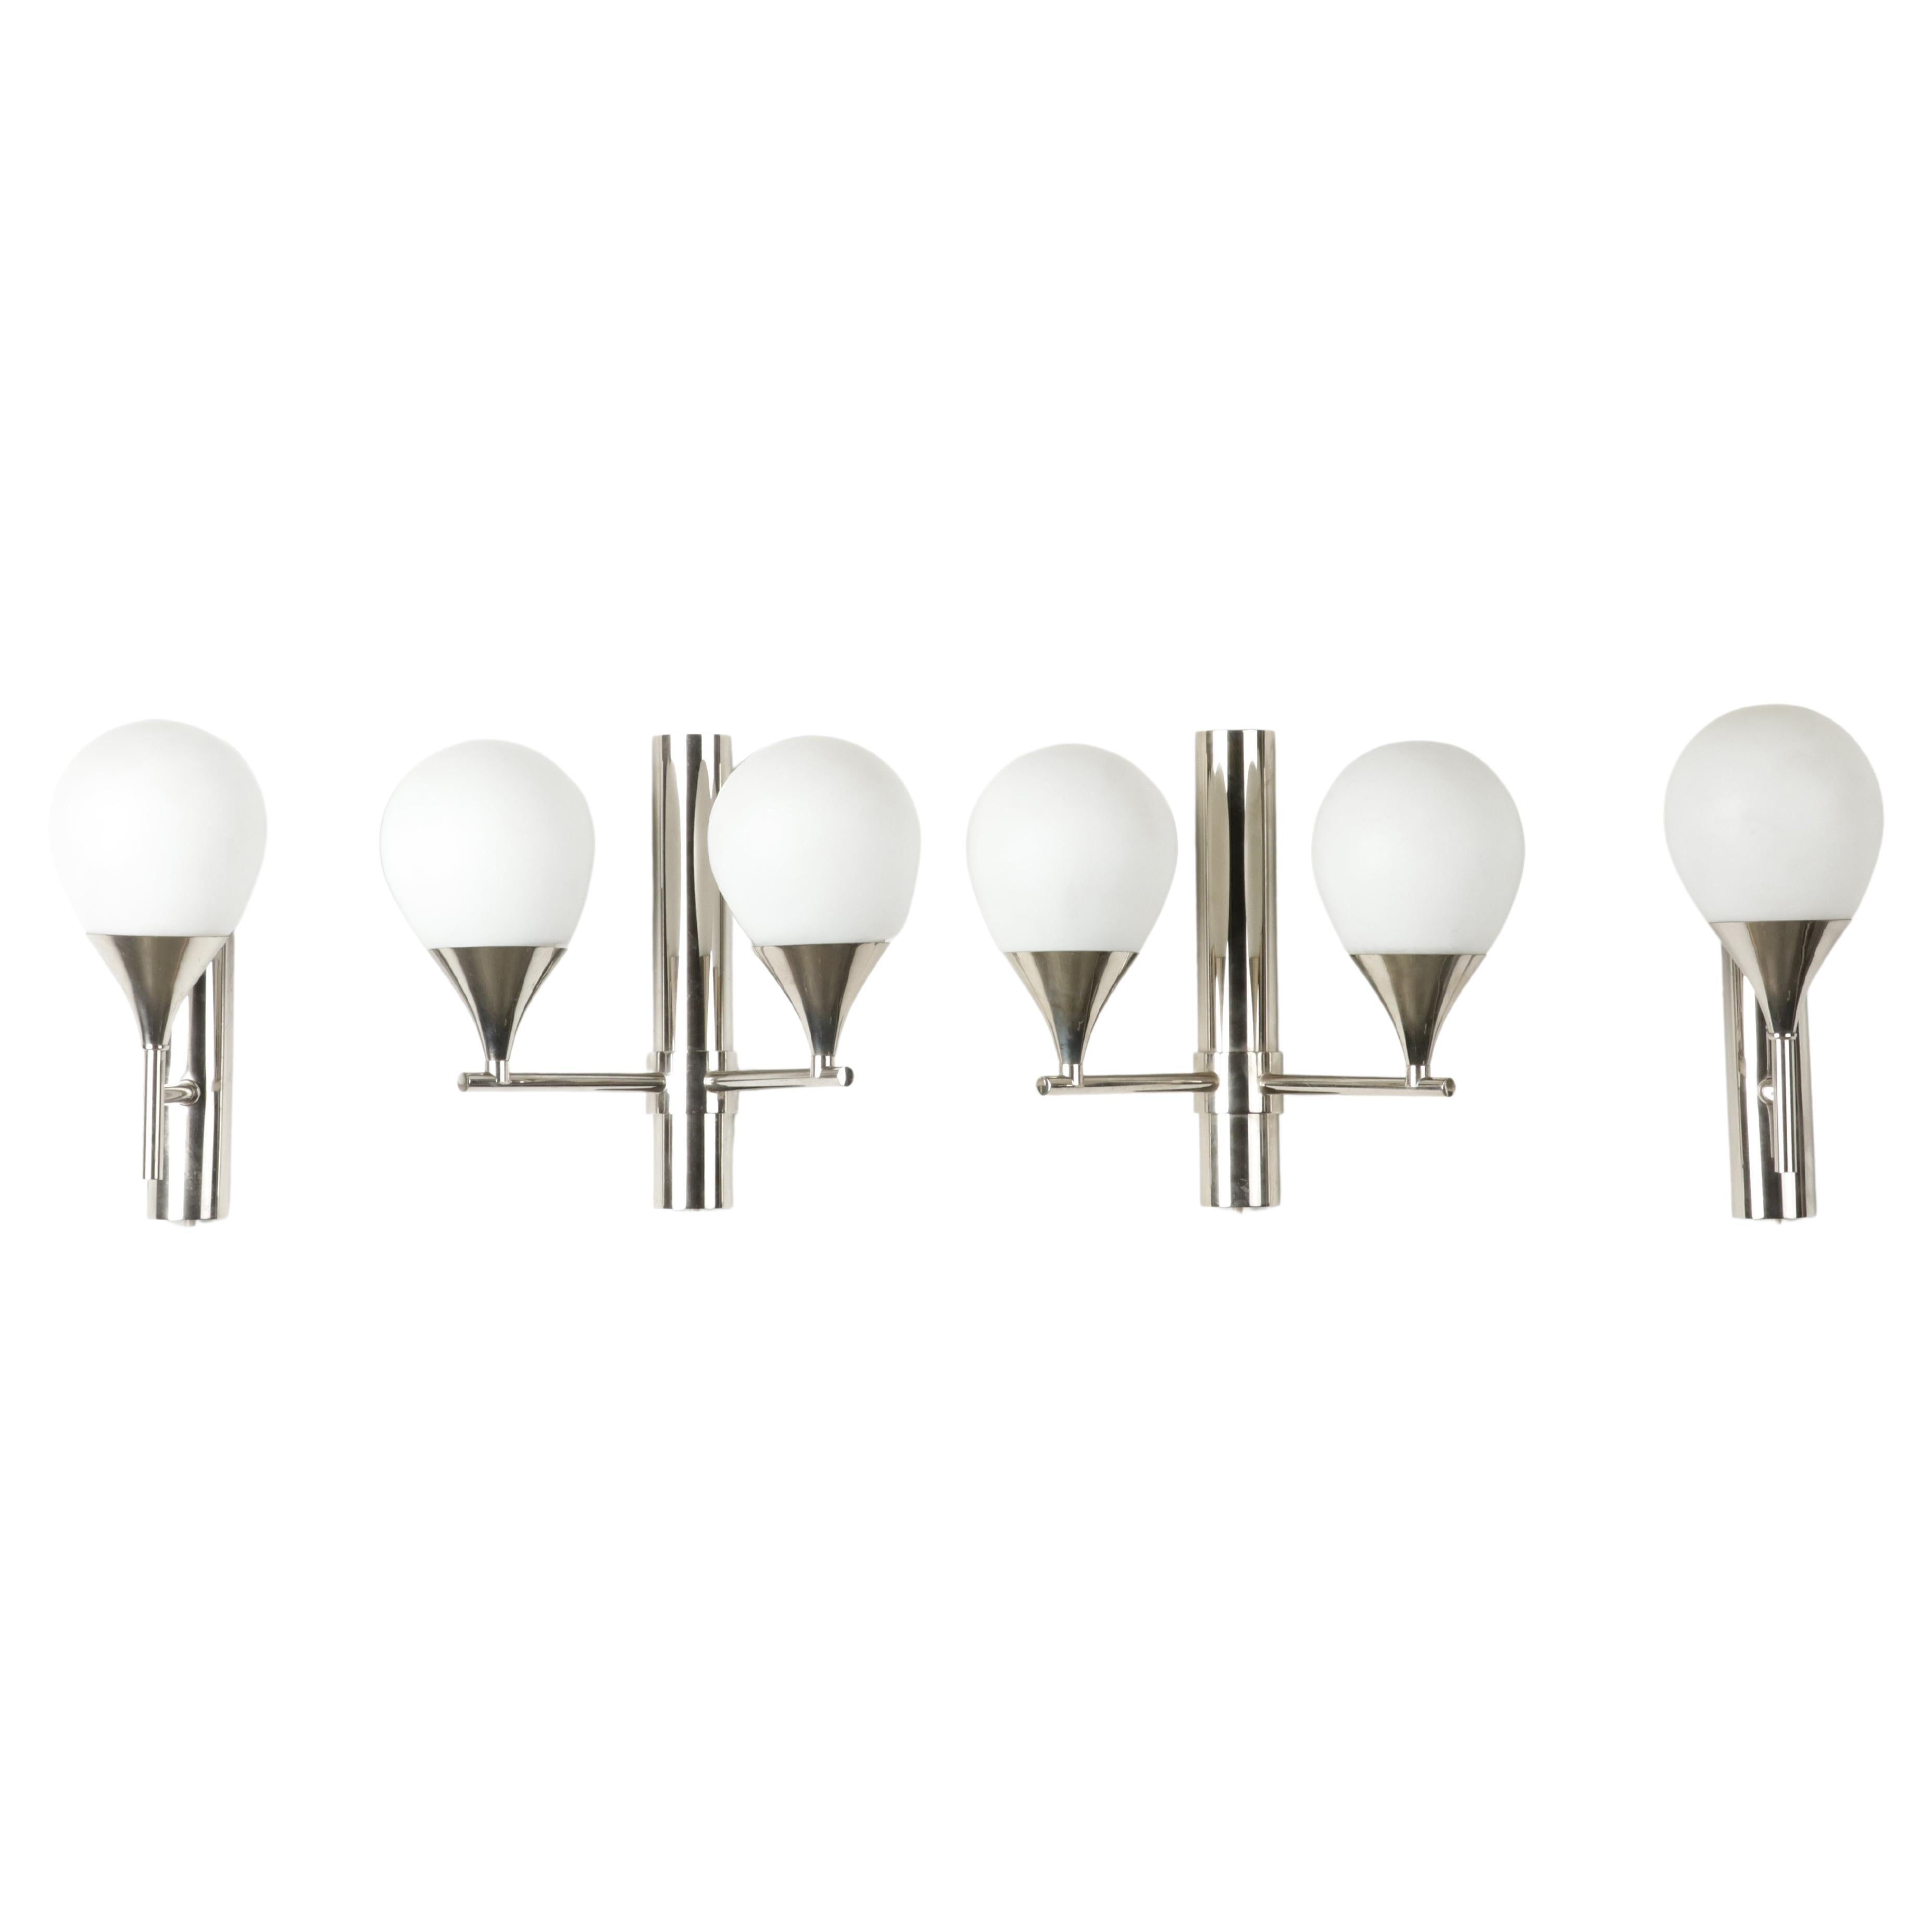 Set of Four Mid-Century Modern Chrome Plated Sconces / Wall Lights For Sale